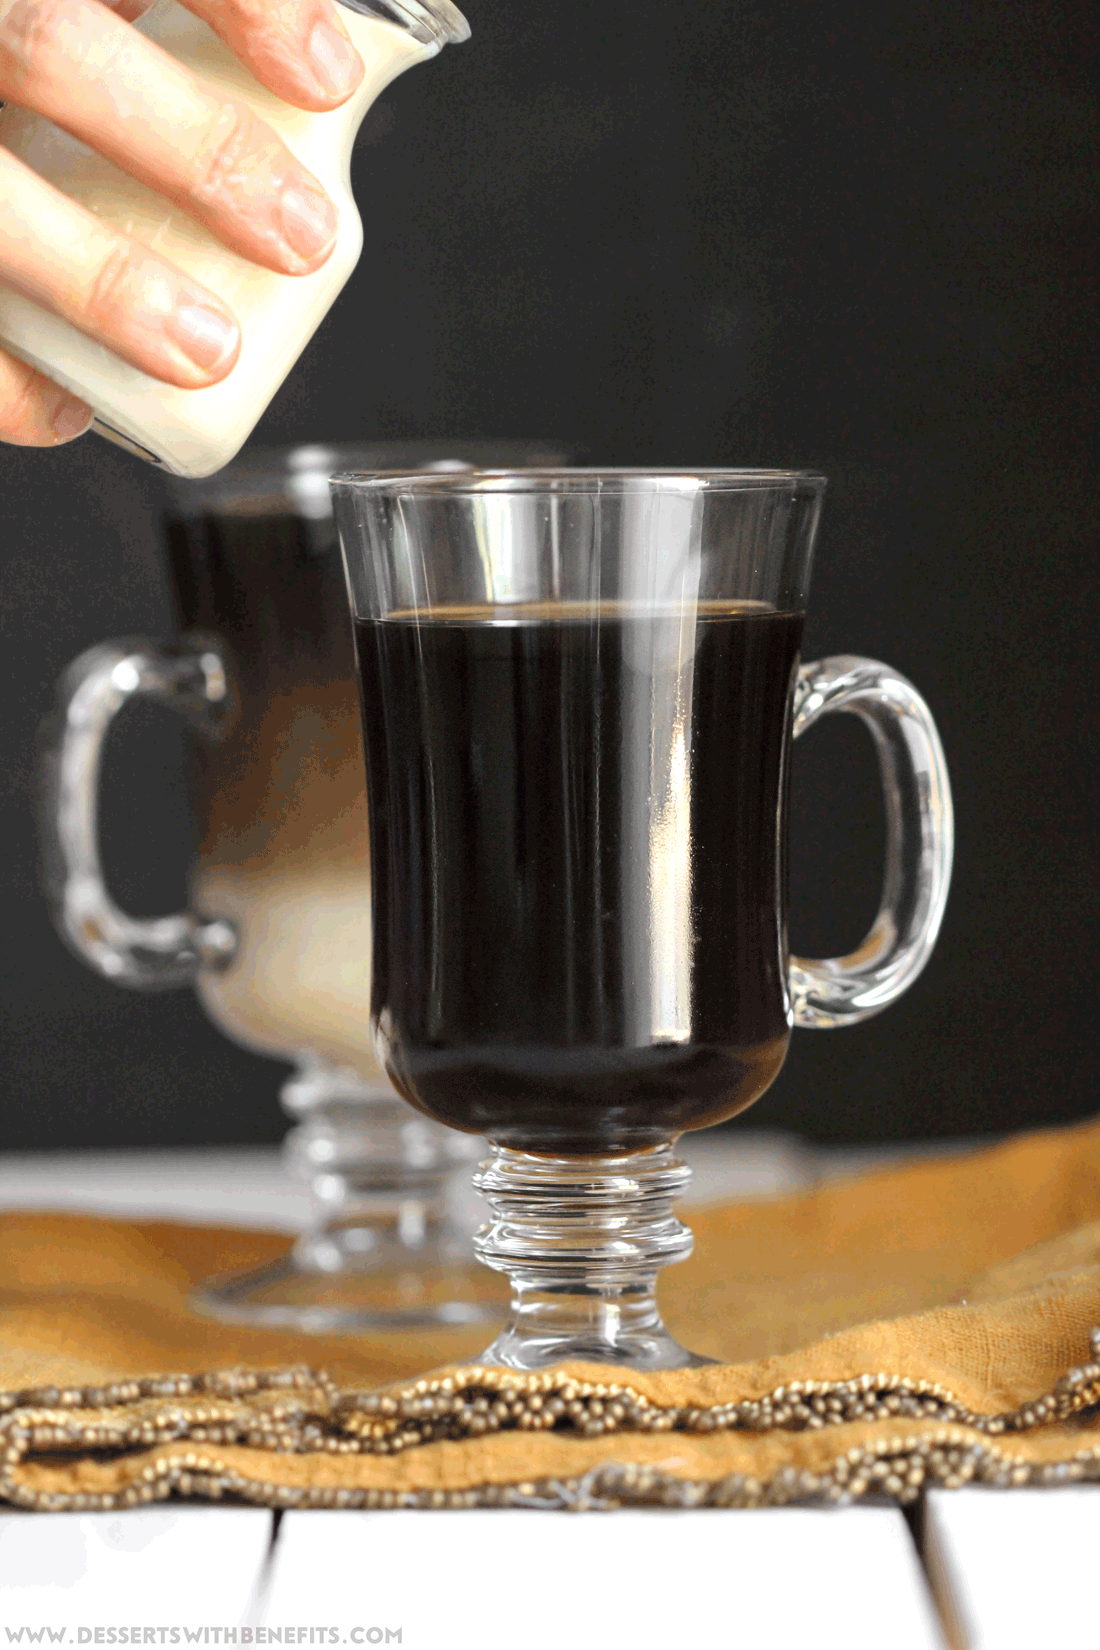 Get your caffeine fix with this sweet and creamy, Healthy Vietnamese Iced Coffee recipe made refined sugar free, fat free, high protein, and gluten free! No need for the sugary condensed milk calorie-bomb when you've got THIS magic in a cup! Healthy Dessert Recipes at Desserts with Benefits